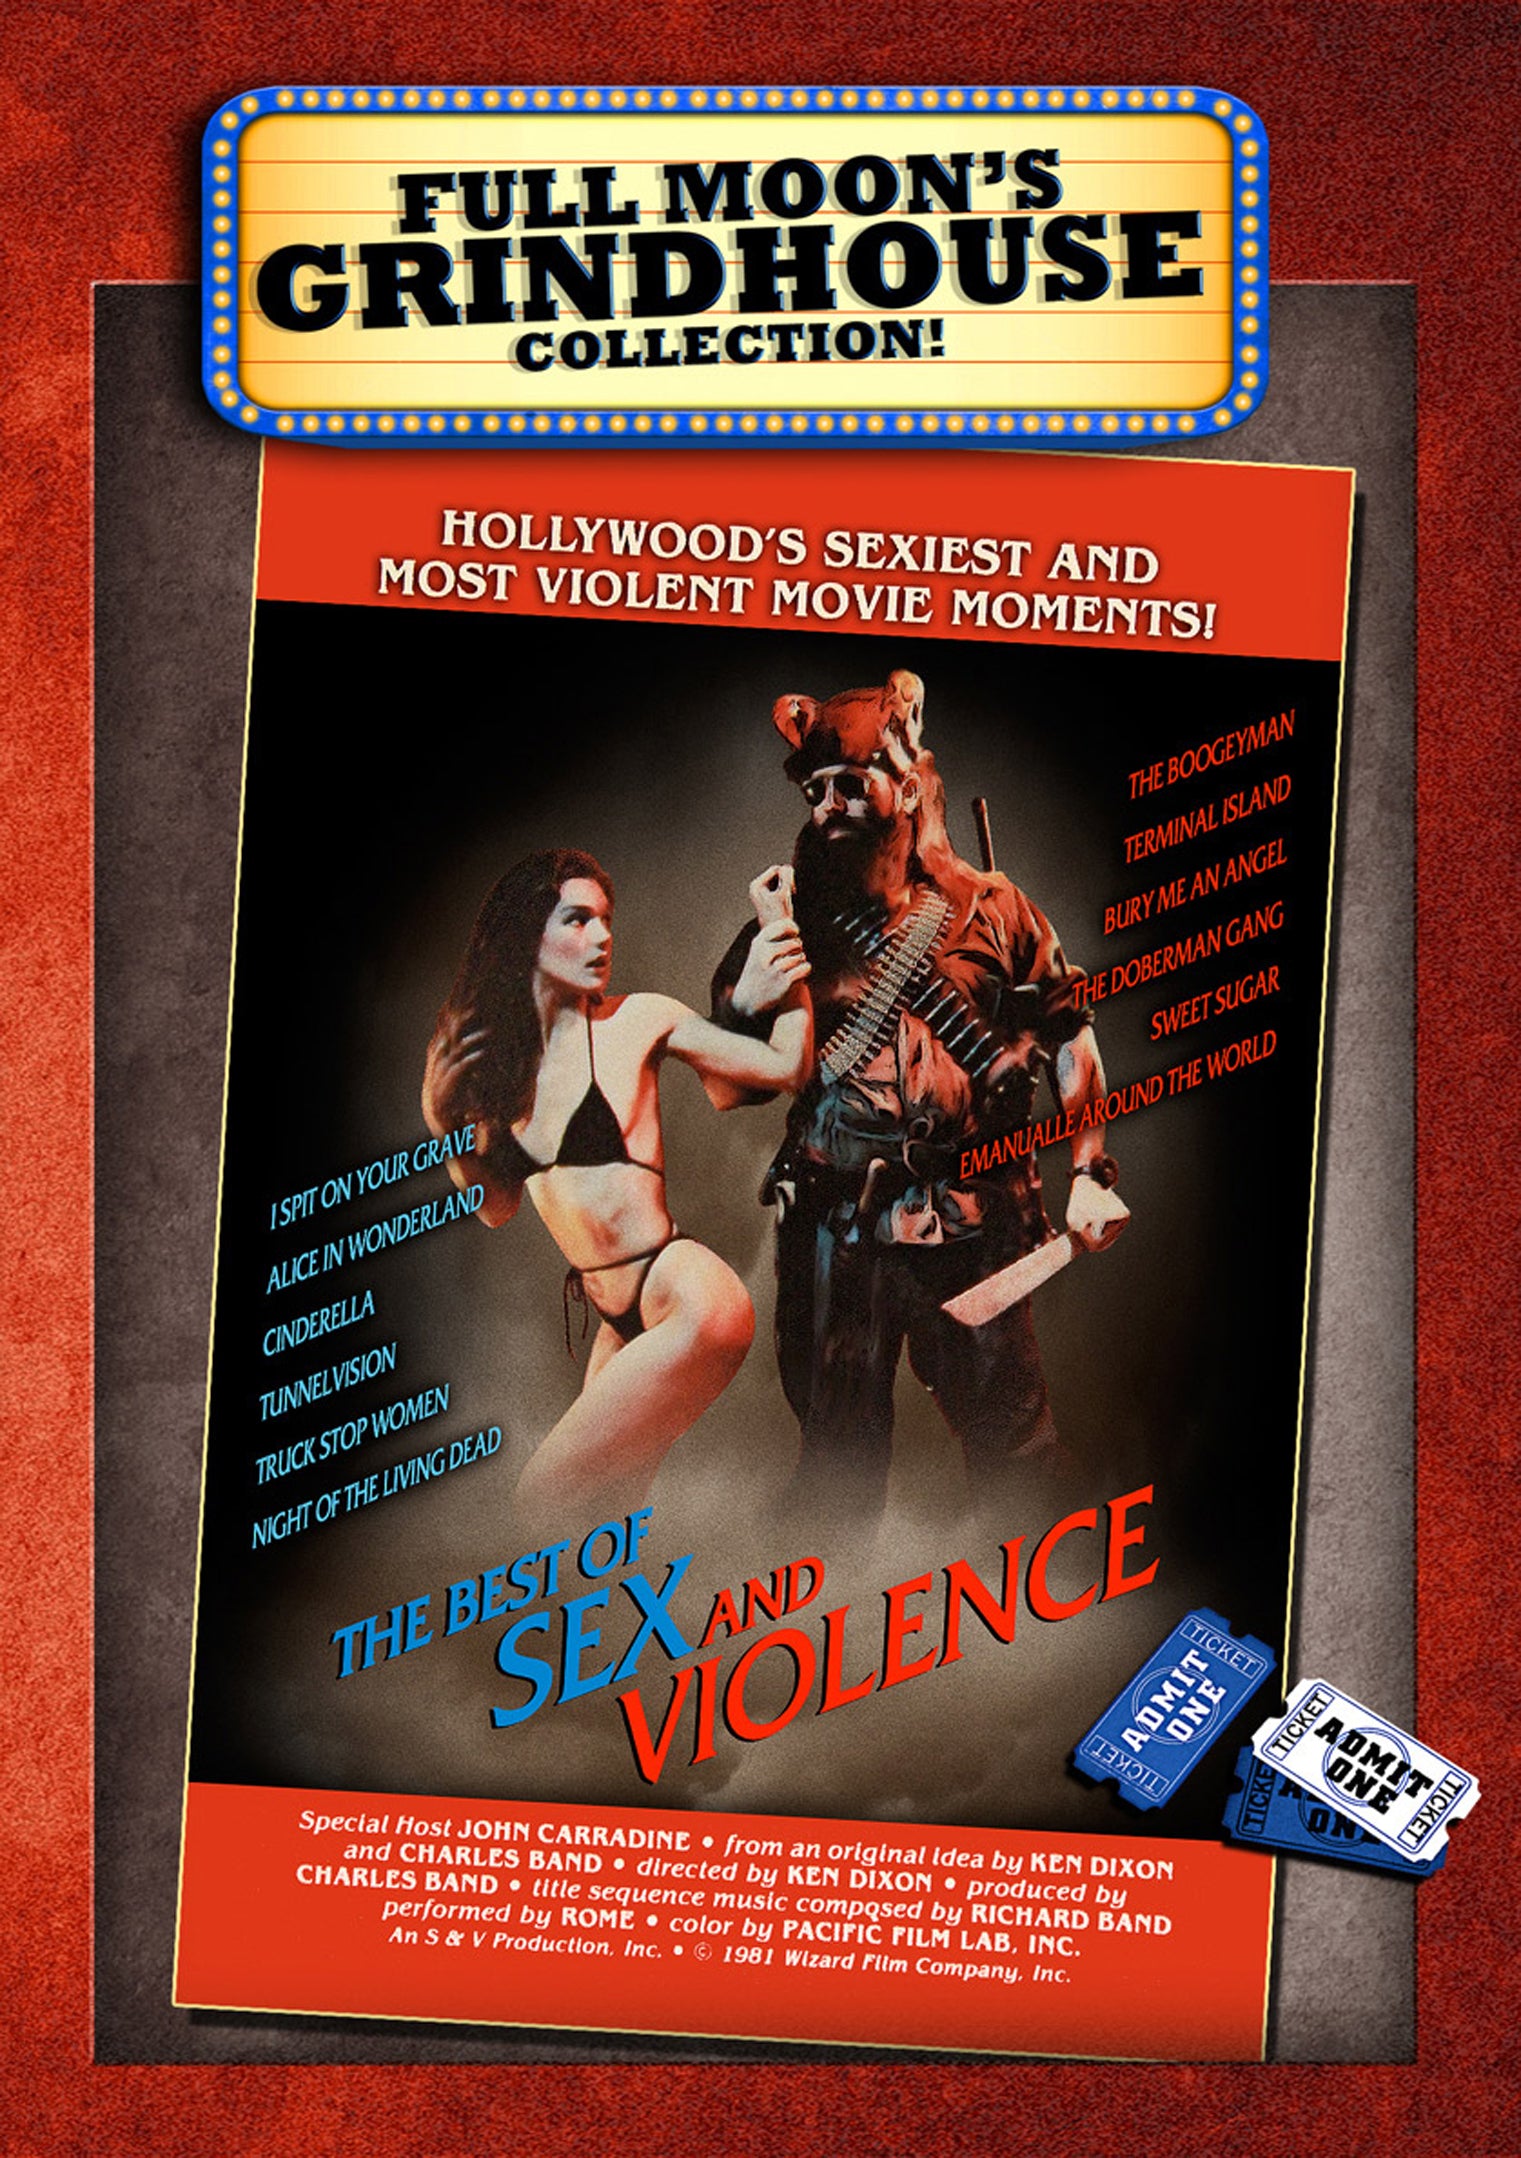 THE BEST OF SEX AND VIOLENCE DVD